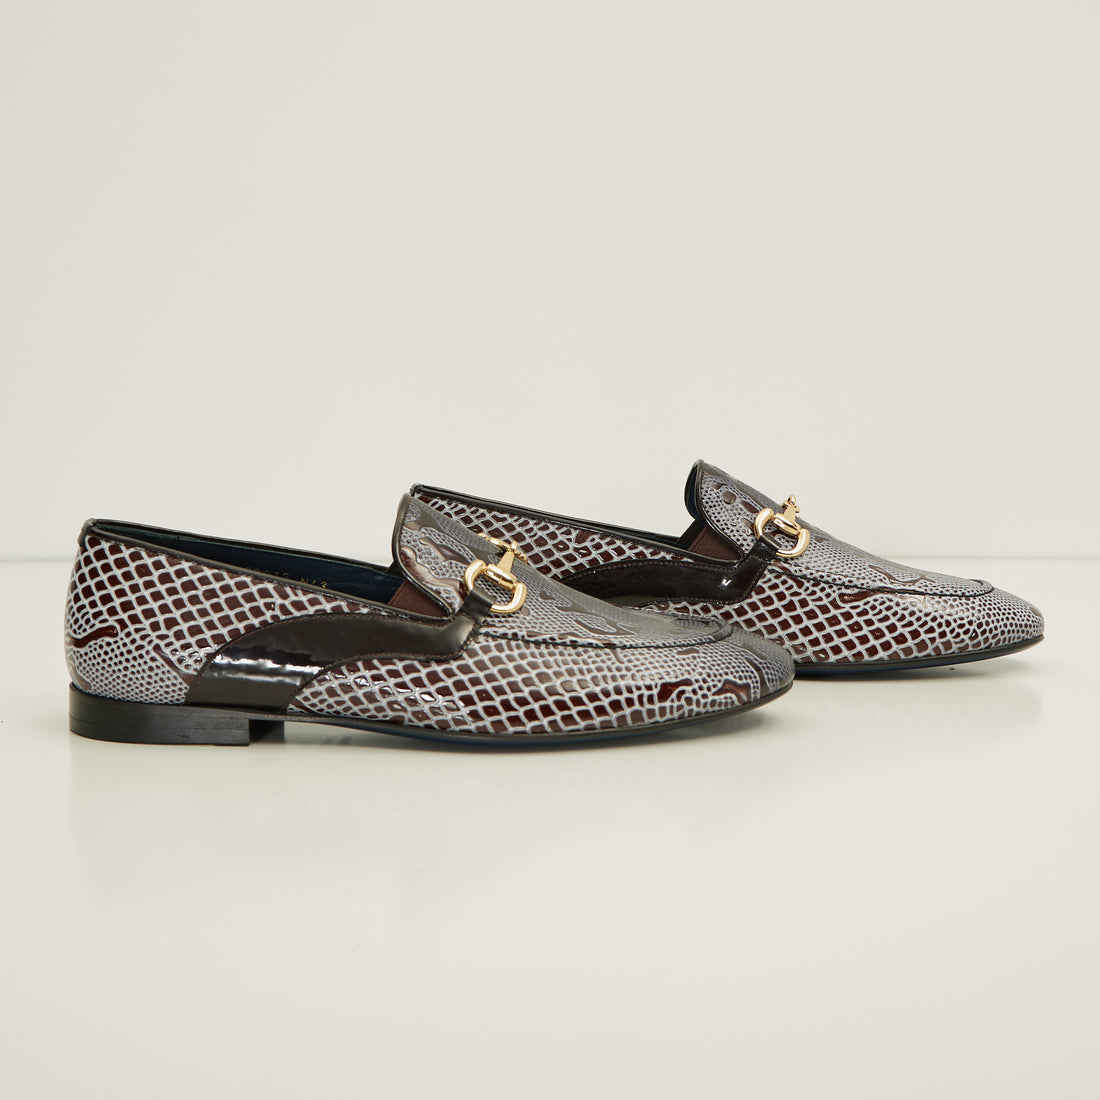 N° C9013X SNAKE EMBOSSED LEATHER AND GOLD METAL BIT LOAFER - BROWN BEIGE